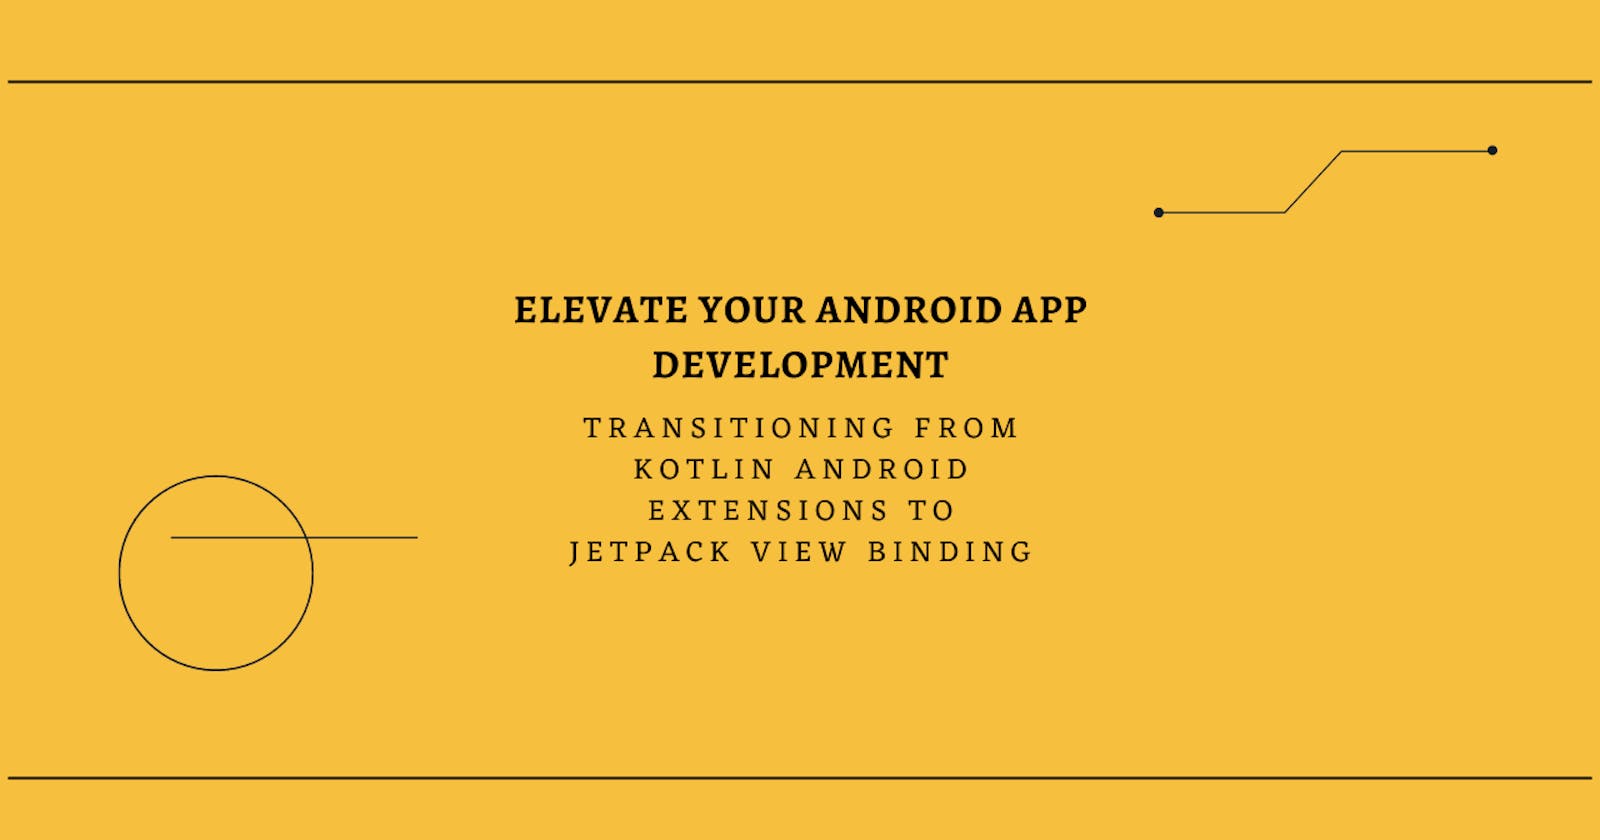 Elevate Your Android App Development: Transitioning from Kotlin Android Extensions to Jetpack View Binding